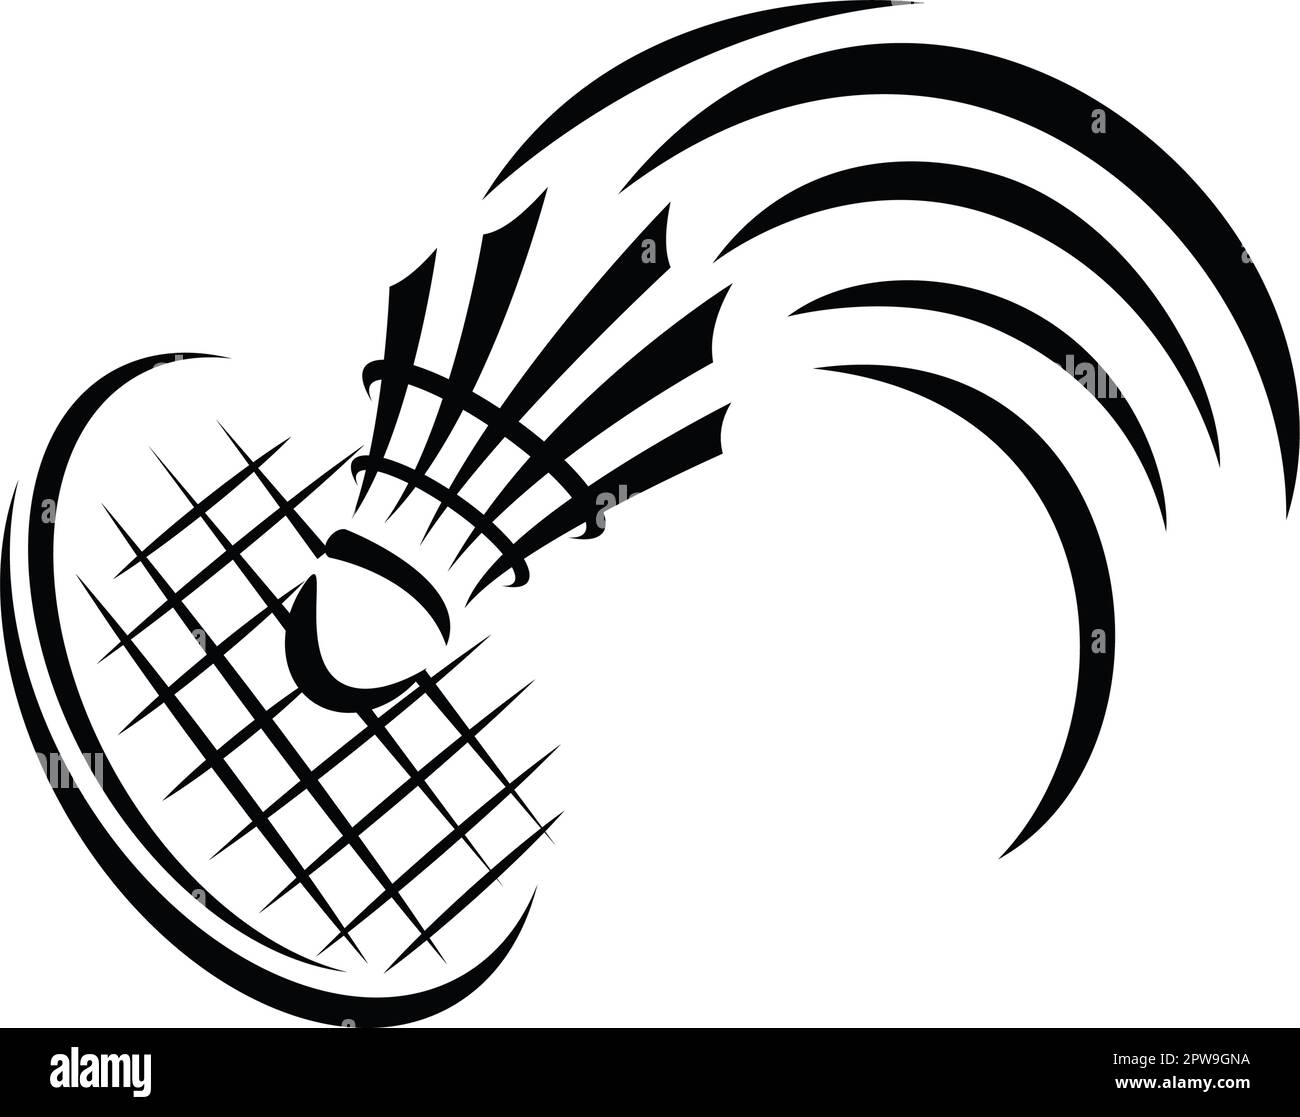 Badminton Game with Racket and Shuttlecock Silhouette Stock Vector